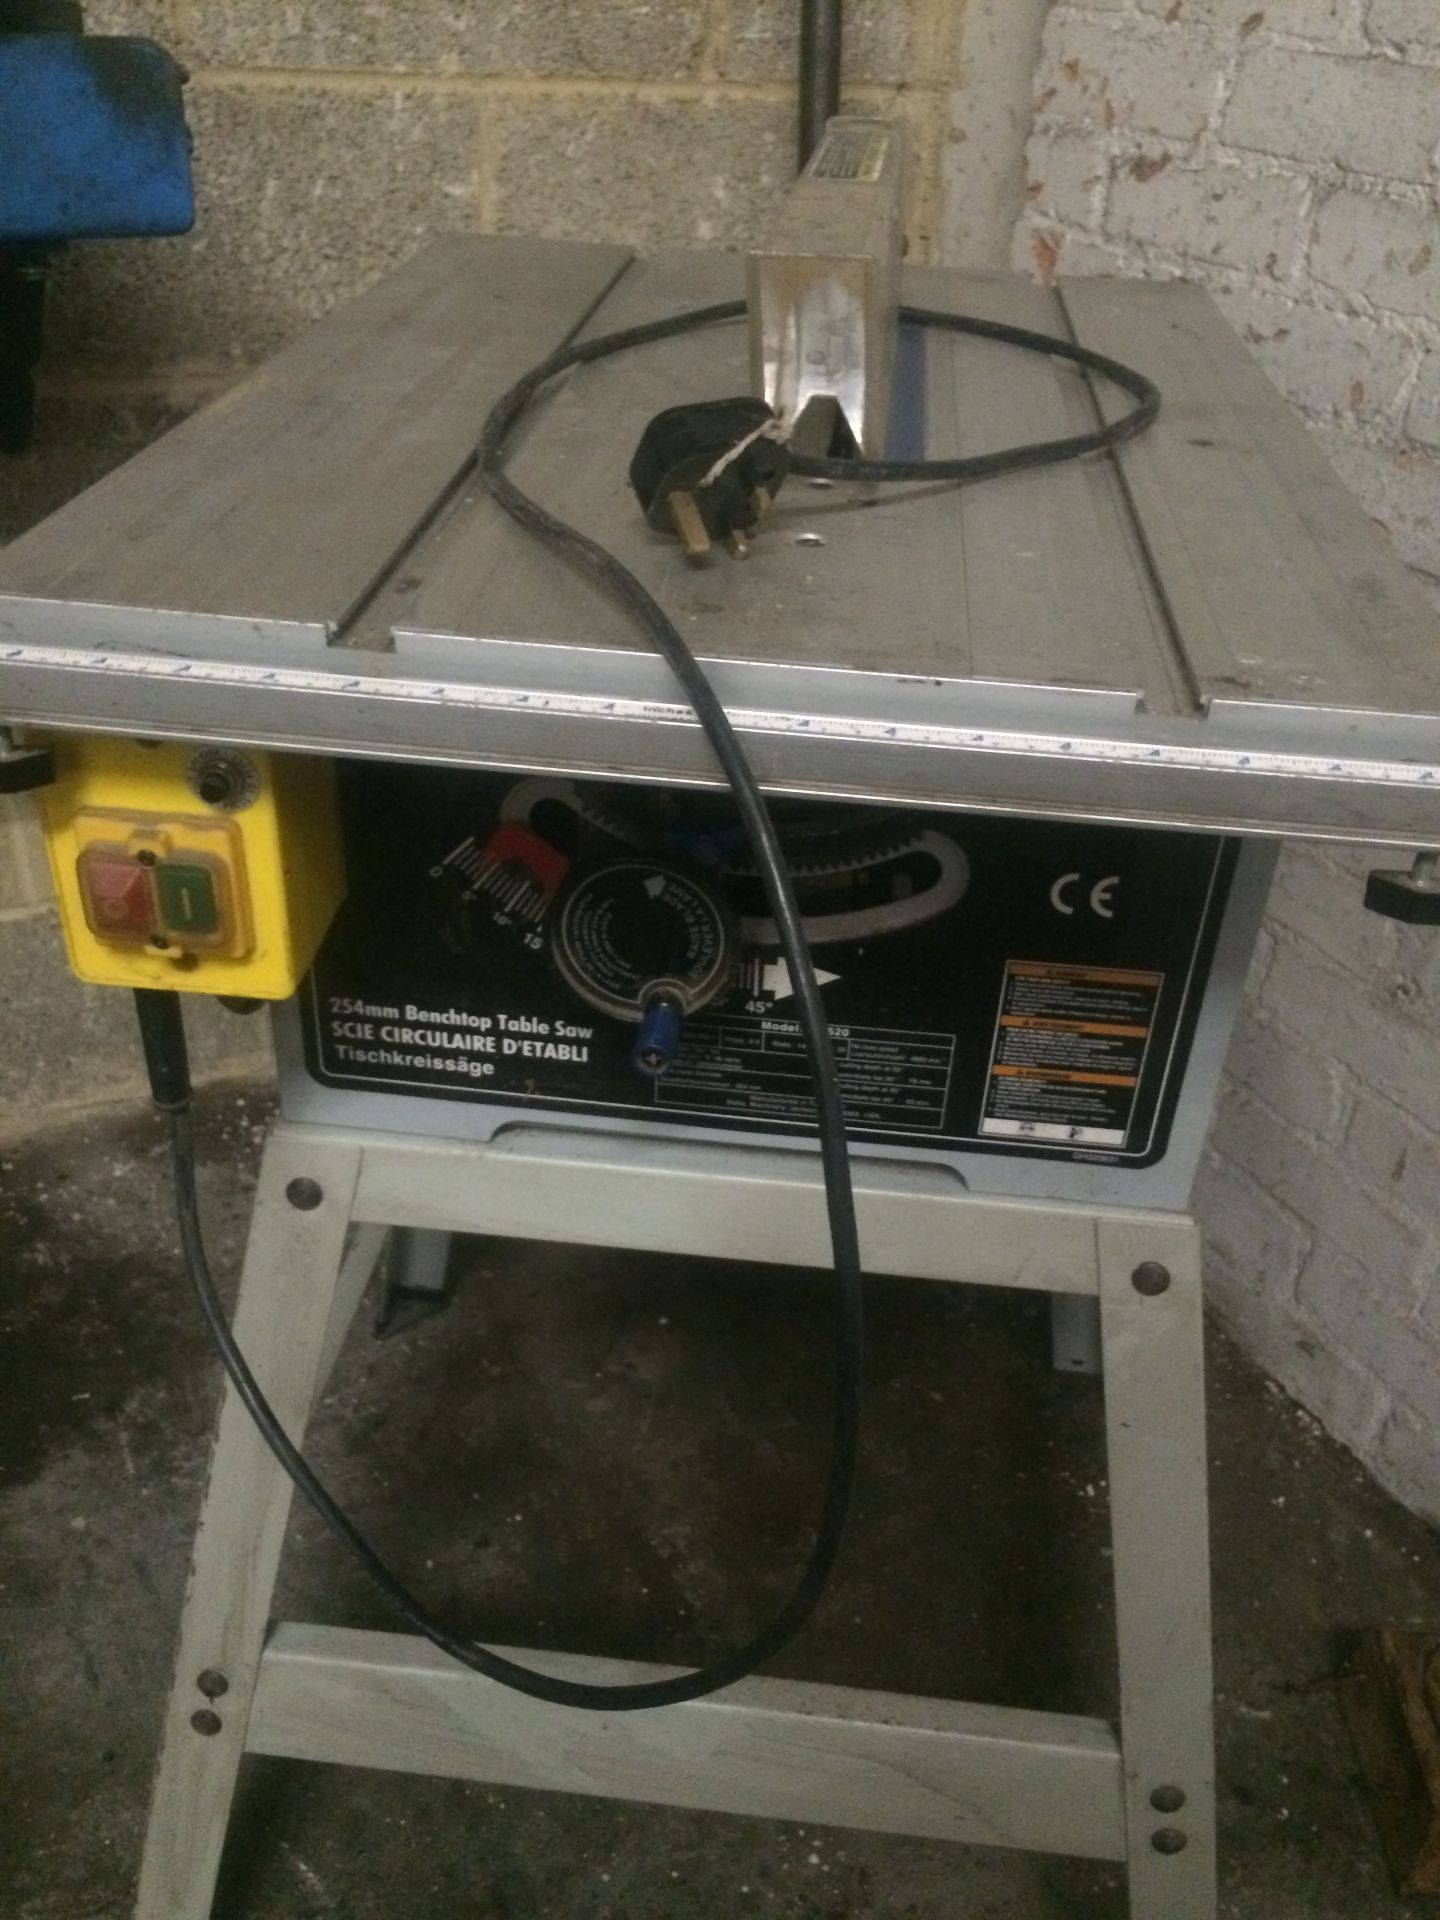 254mm Delta Benchtop Table Saw (Model 36-520) - Image 6 of 7